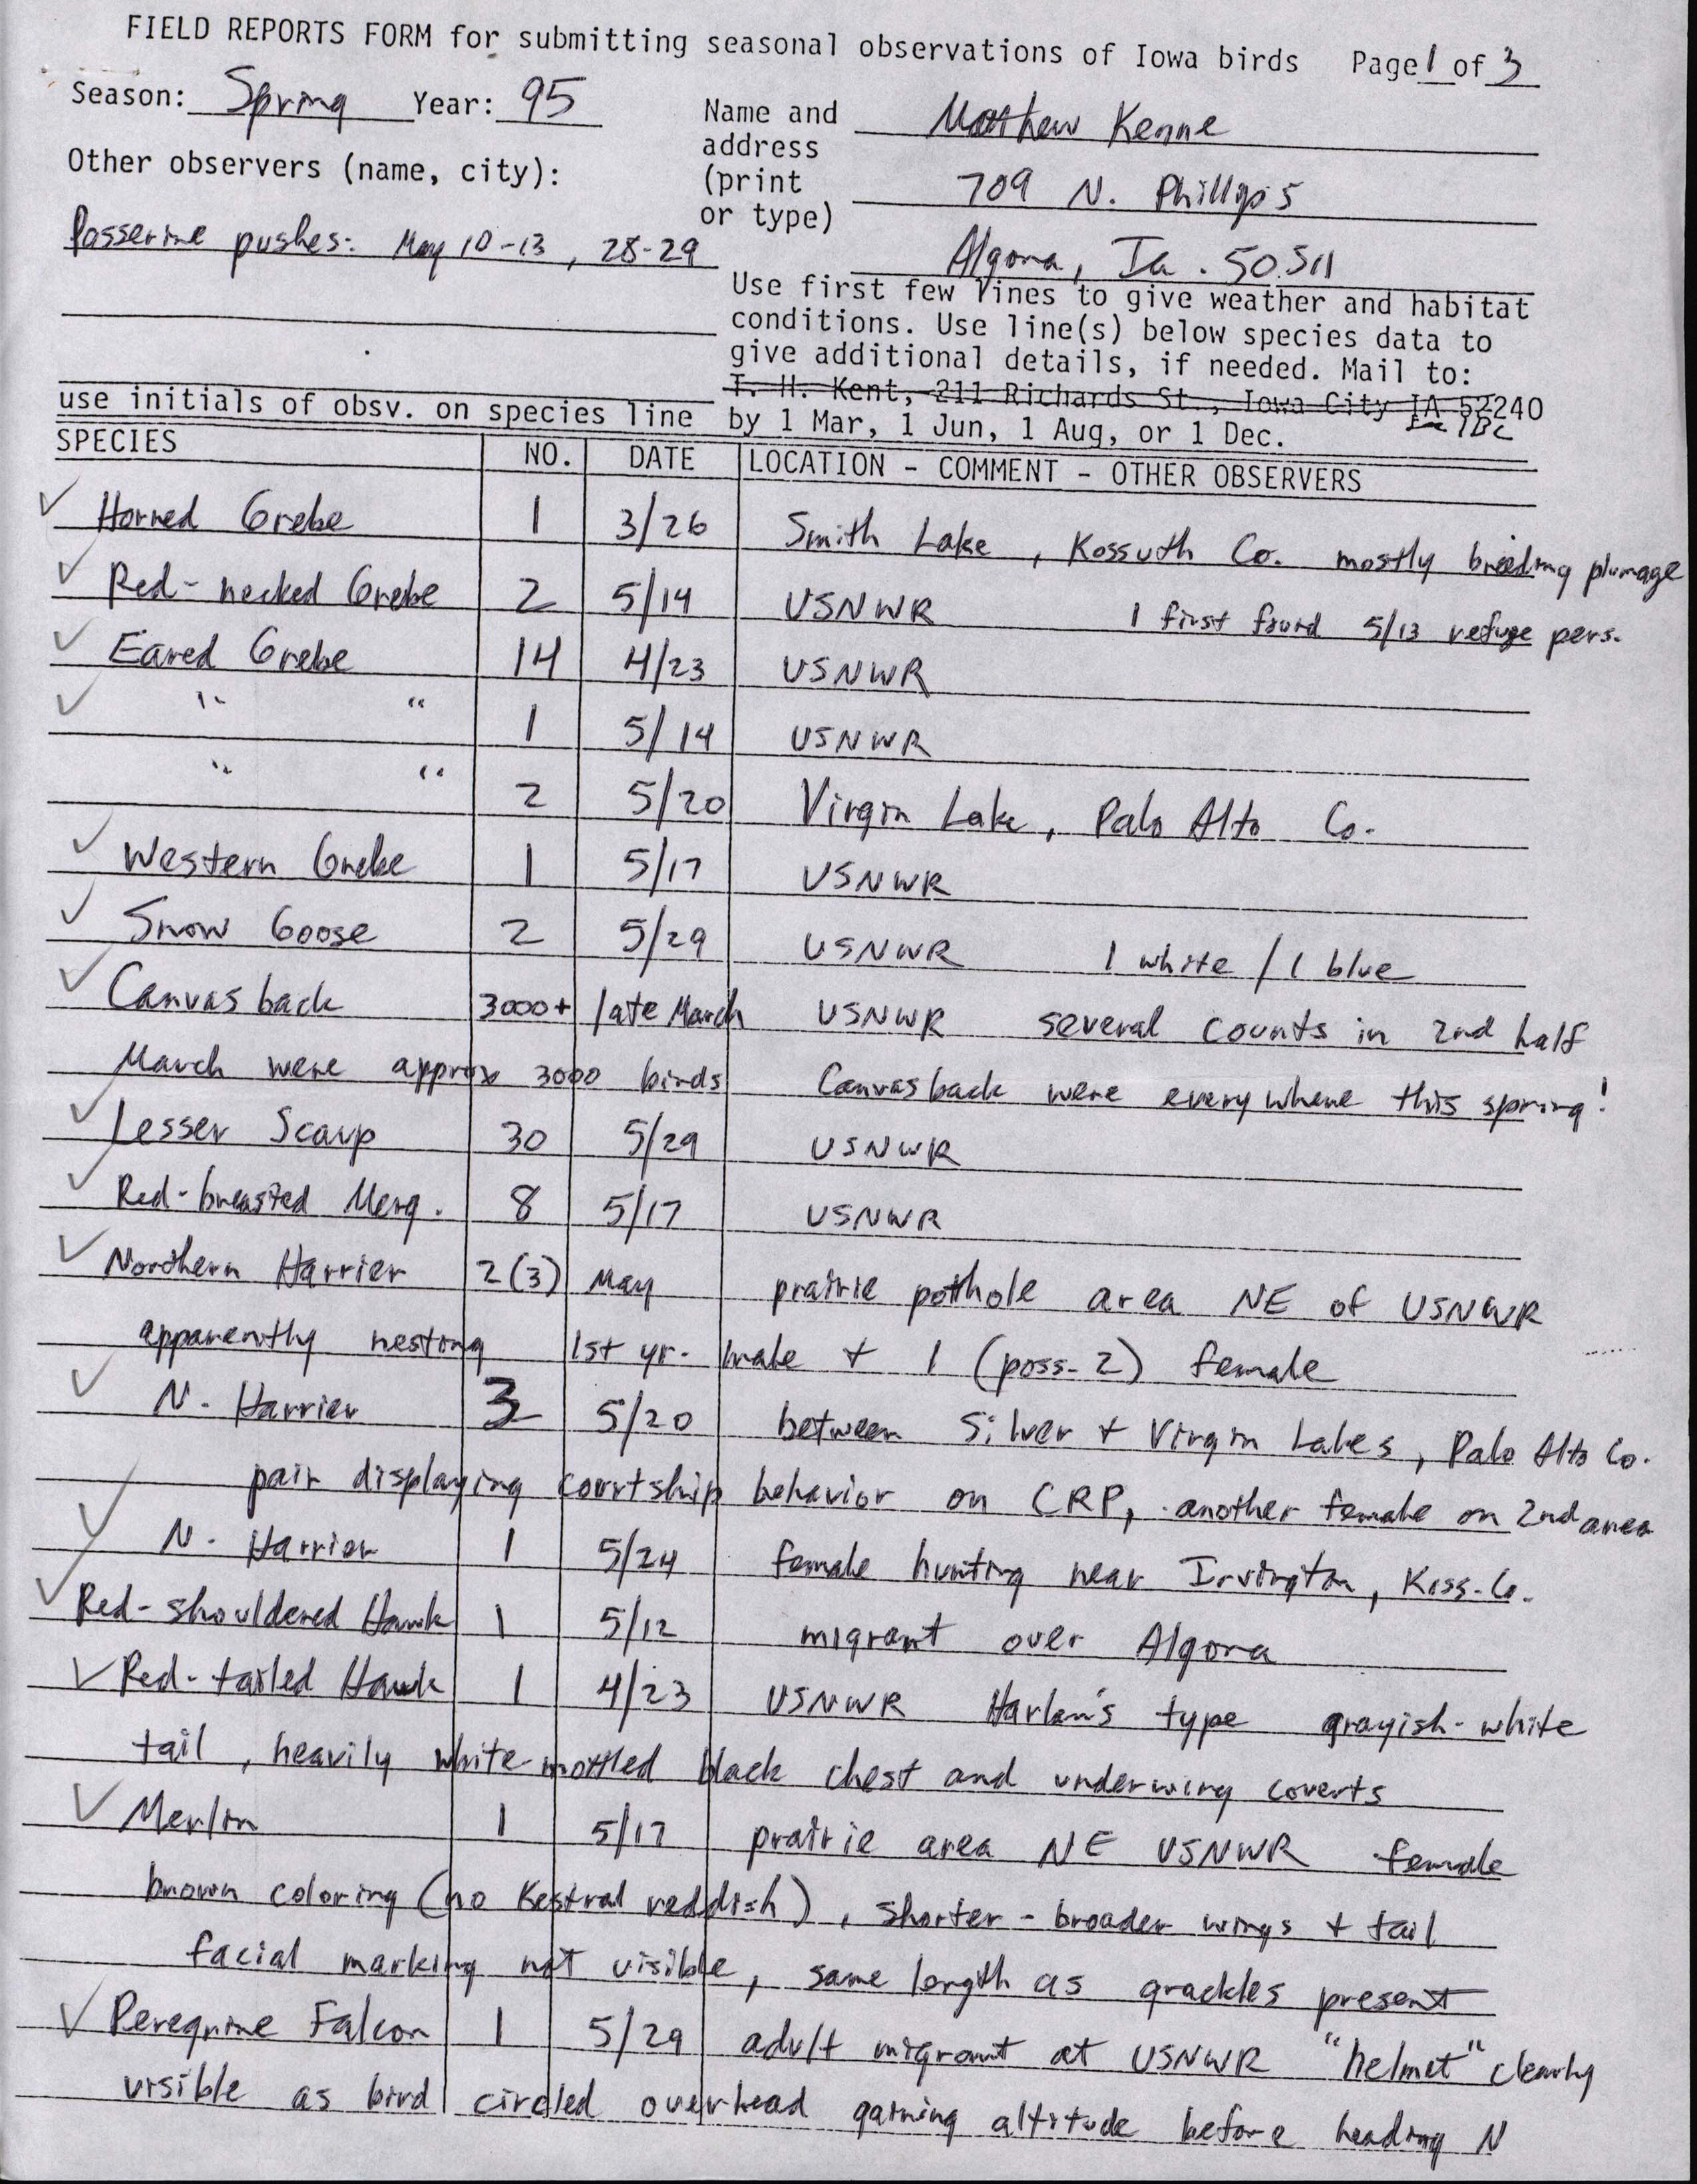 Field reports form for submitting seasonal observations of Iowa birds, spring 1995, Matthew Kenne